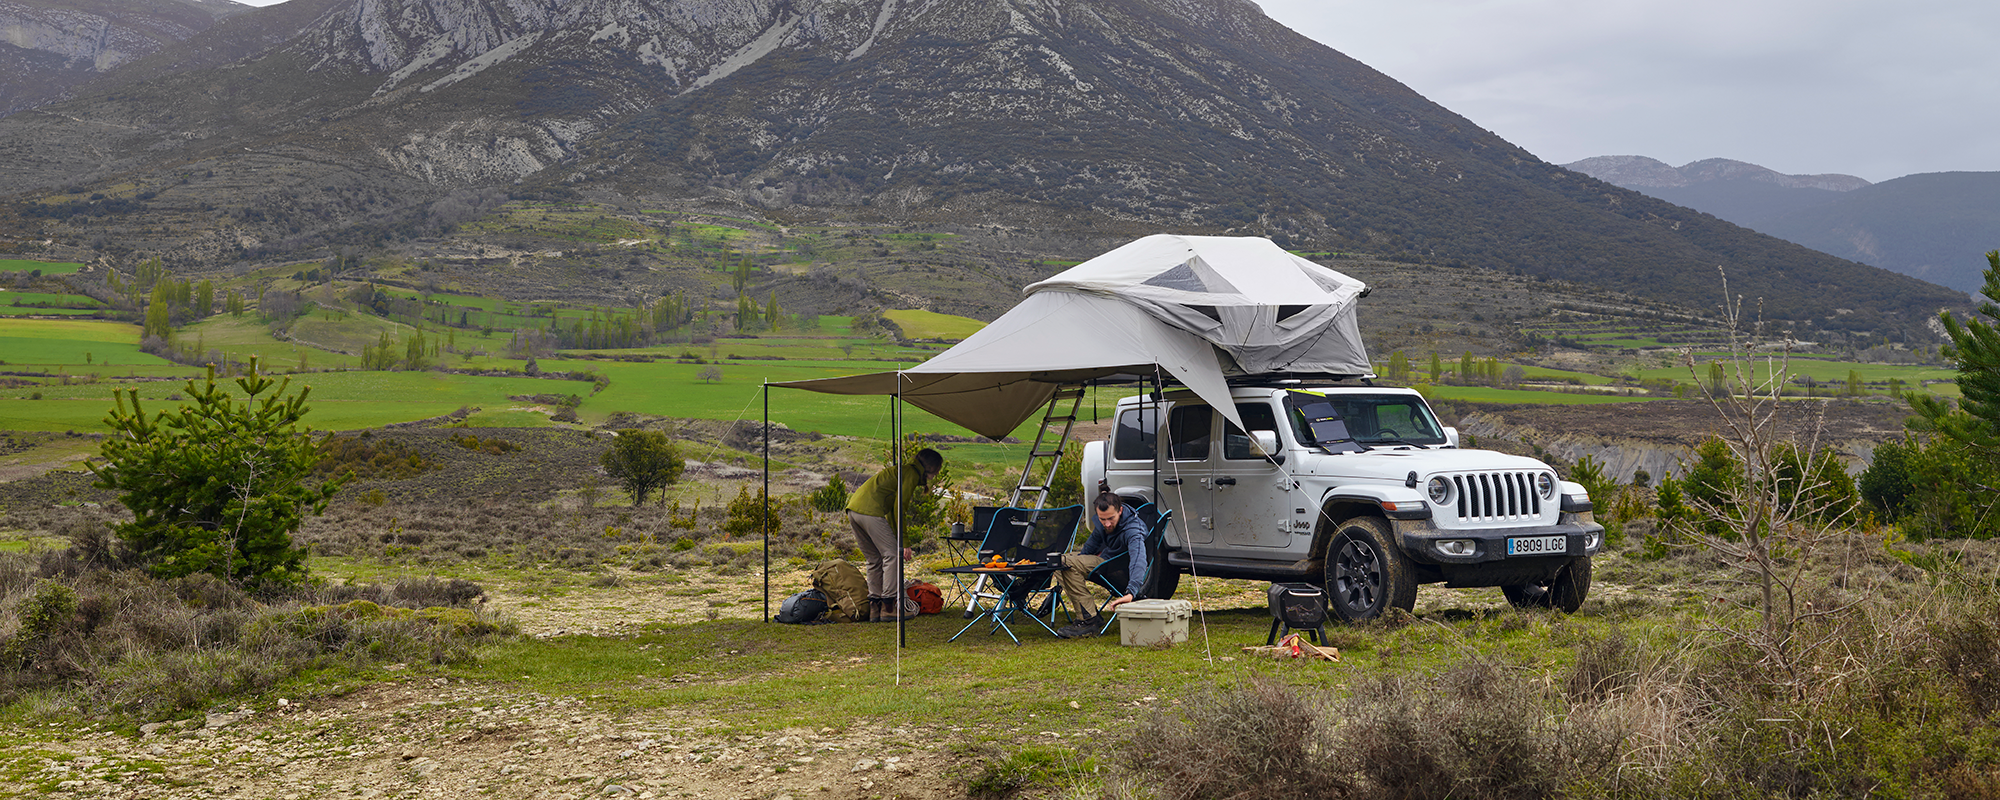 Two people sit in camping chairs under the awning of a jeep with a Thule Approach rooftop tent that is parked in the mountains.